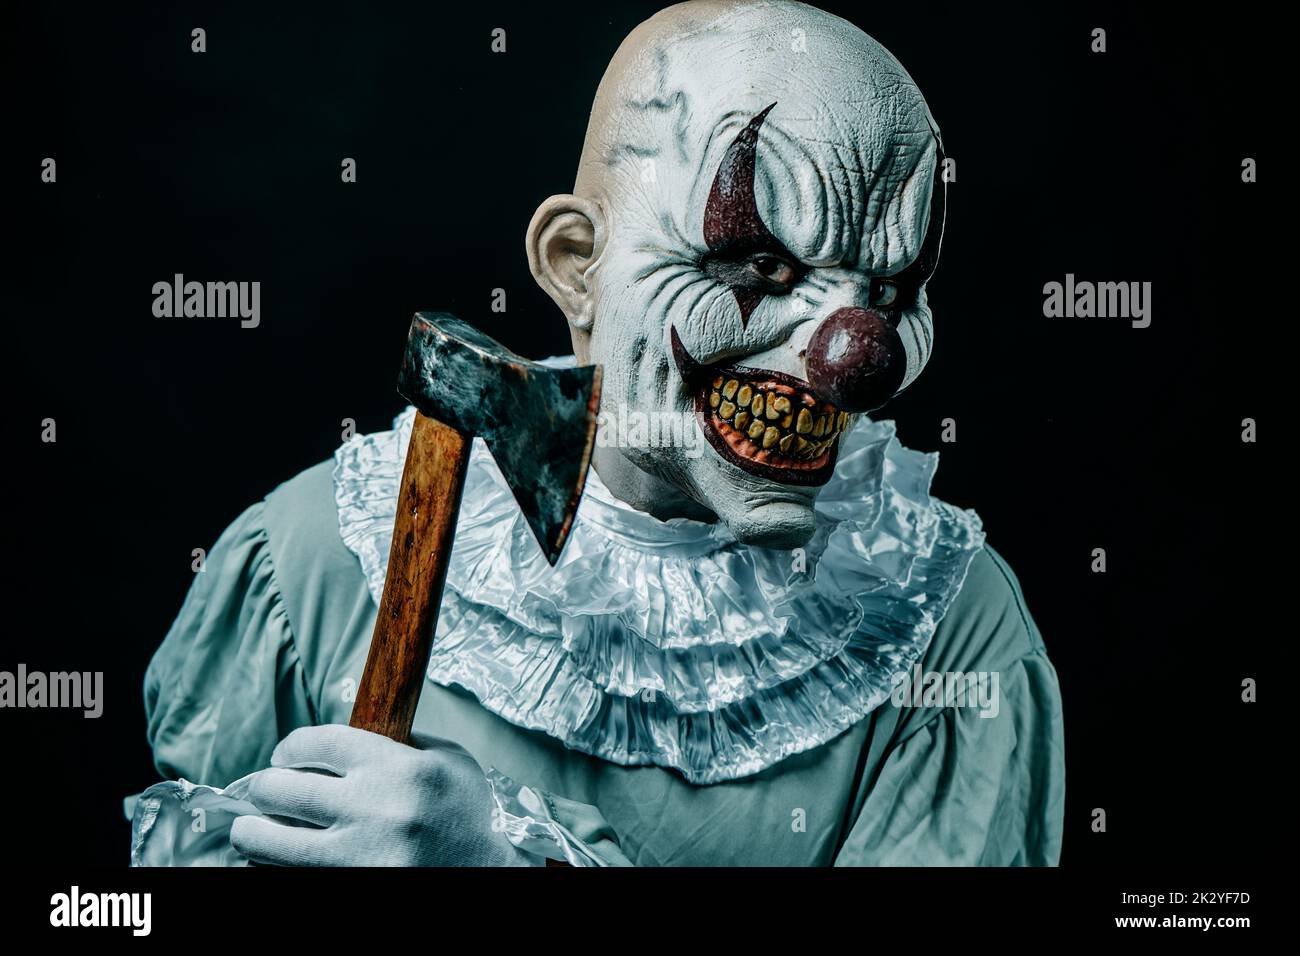 closeup of a creepy bald evil clown threatening the observer with an axe with stains of blood, against a black background Stock Photo